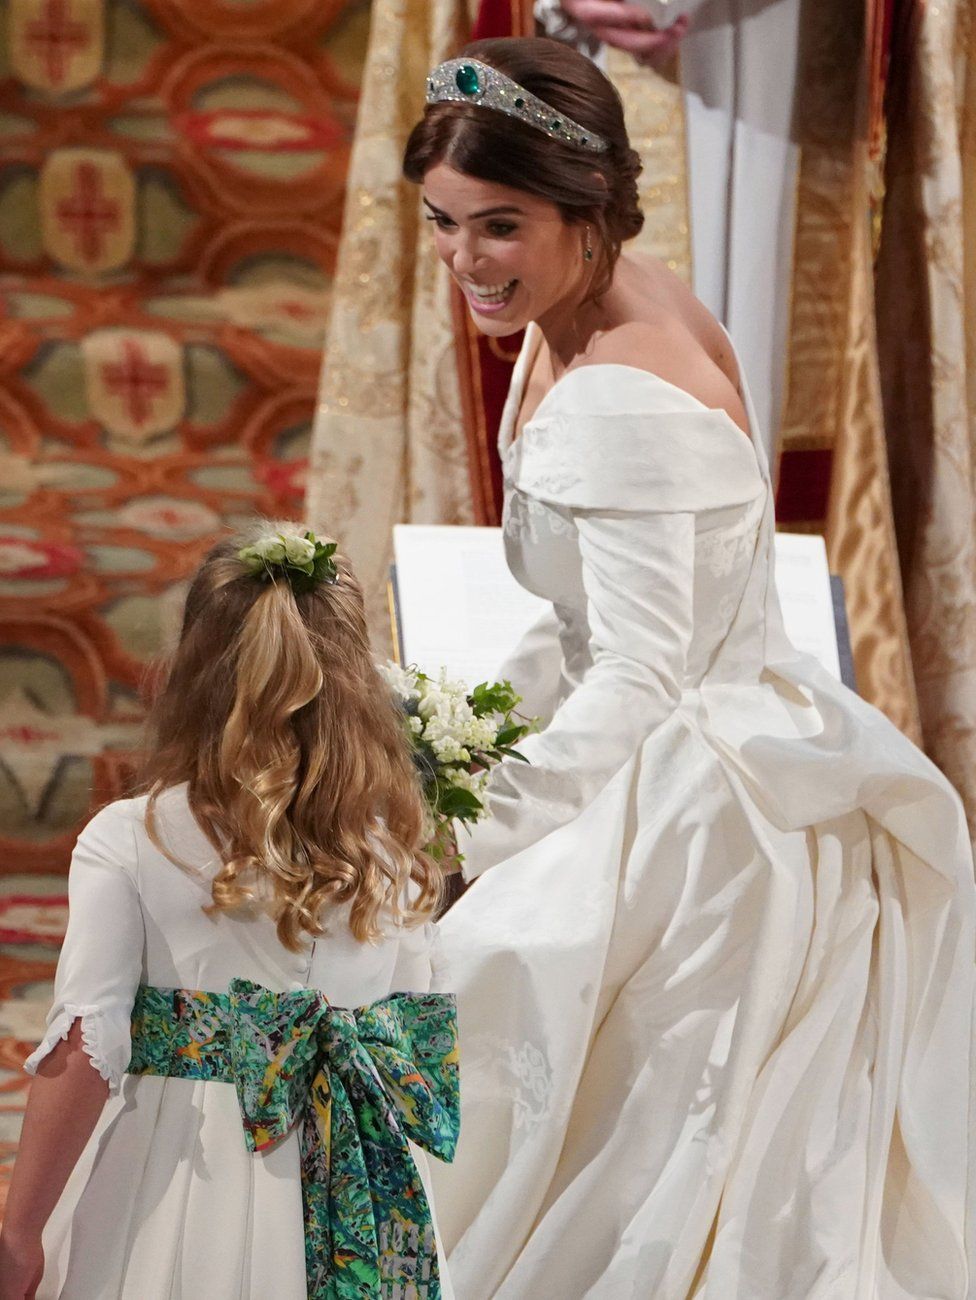 Princess Eugenie of York passes her bouquet to bridesmaid